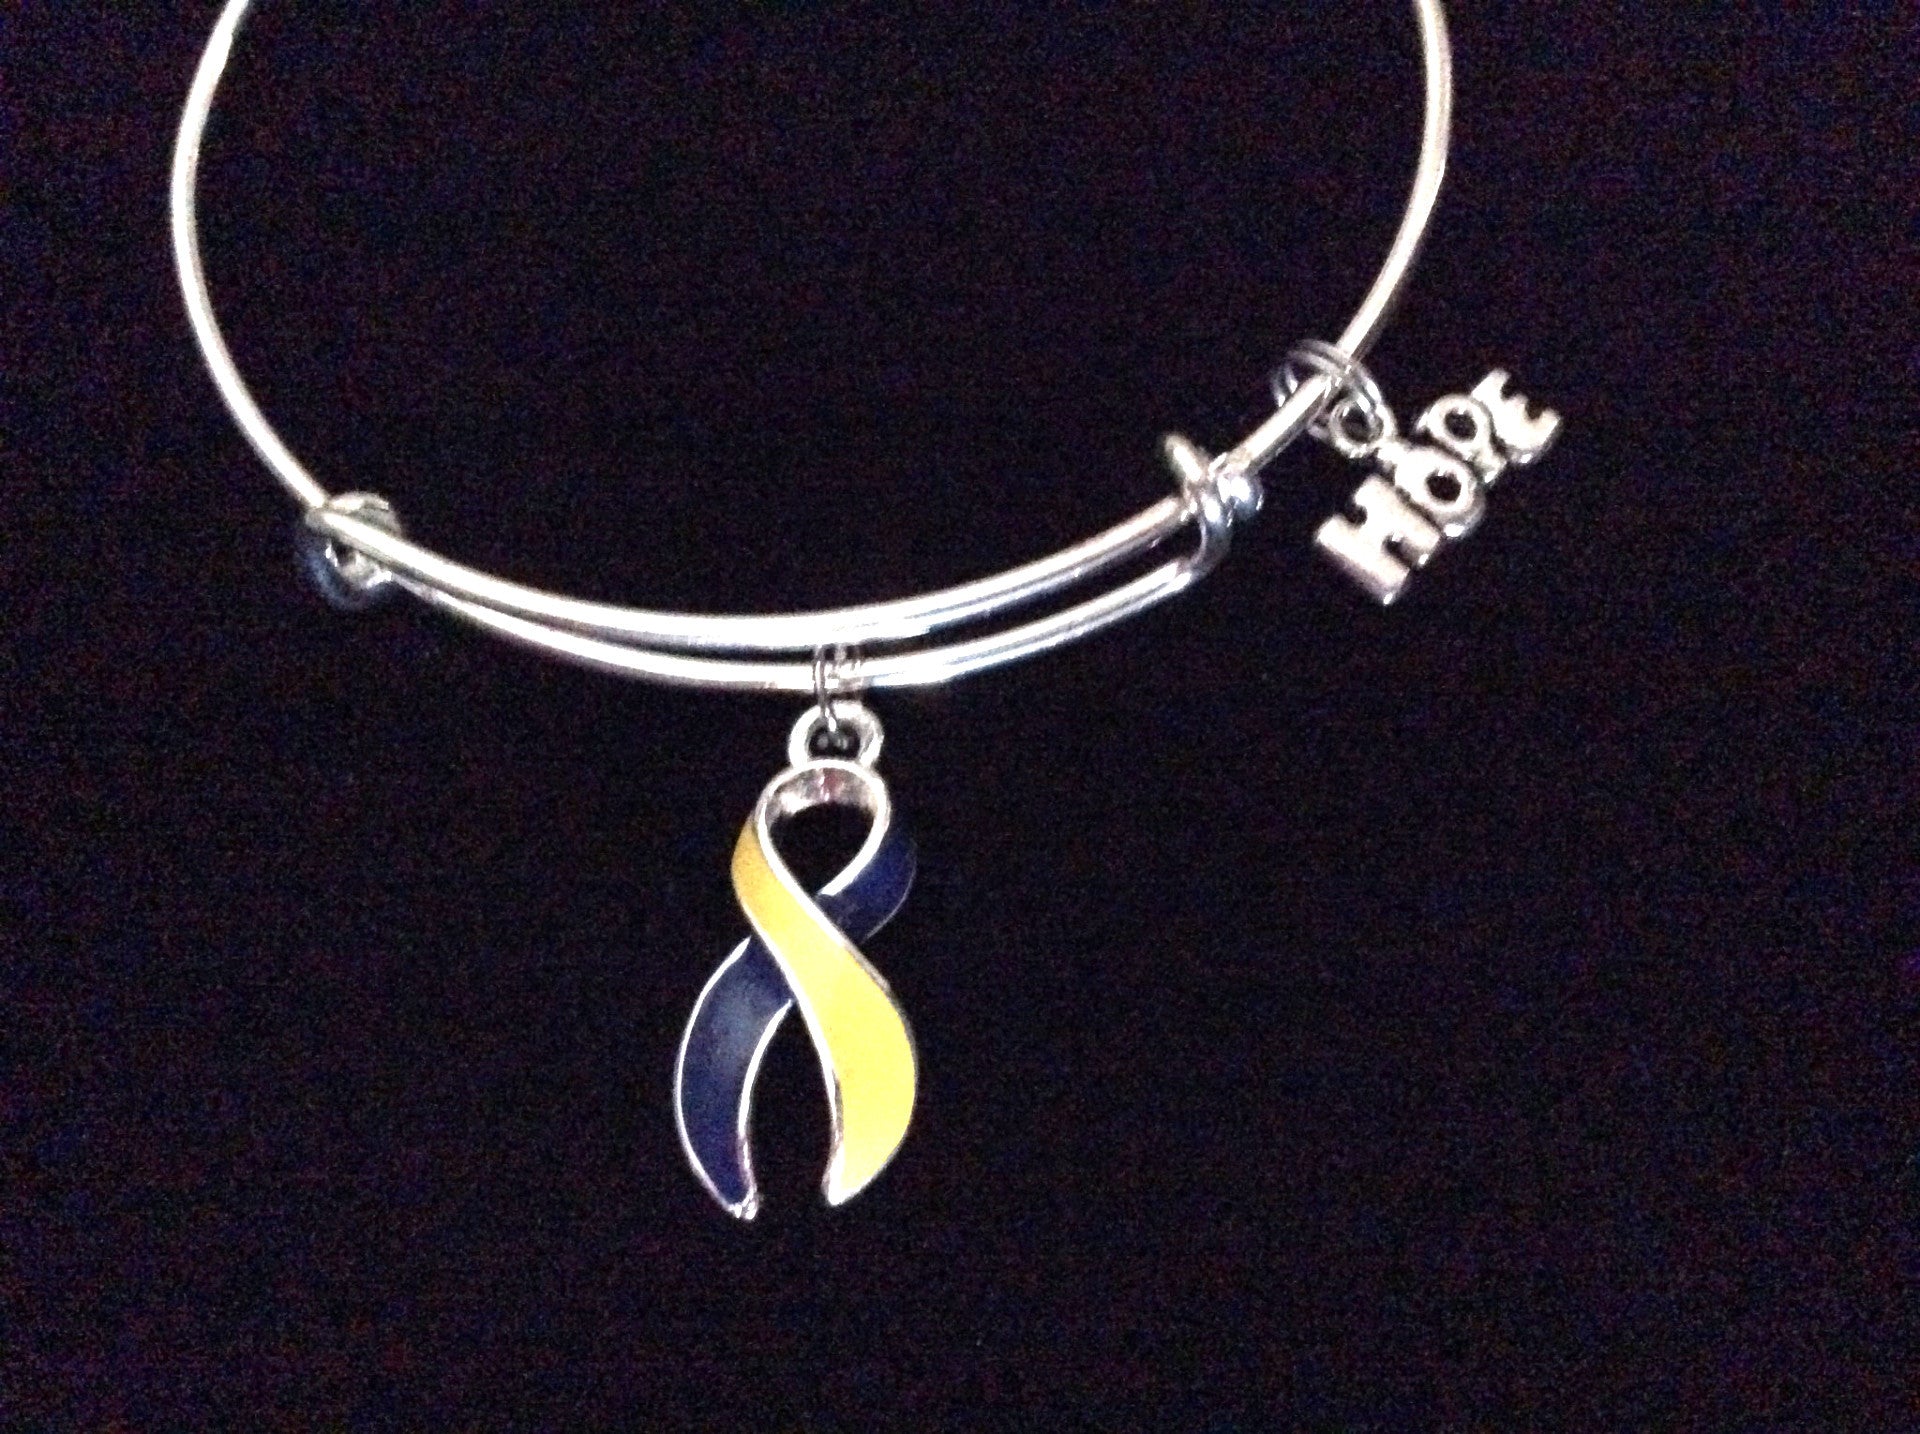 Blue and Yellow Awareness Ribbon Expandable Charm Bracelet Adjustable Wire Bangle Downs Syndrome Meaningful Hope (Other Awareness Ribbons Available)